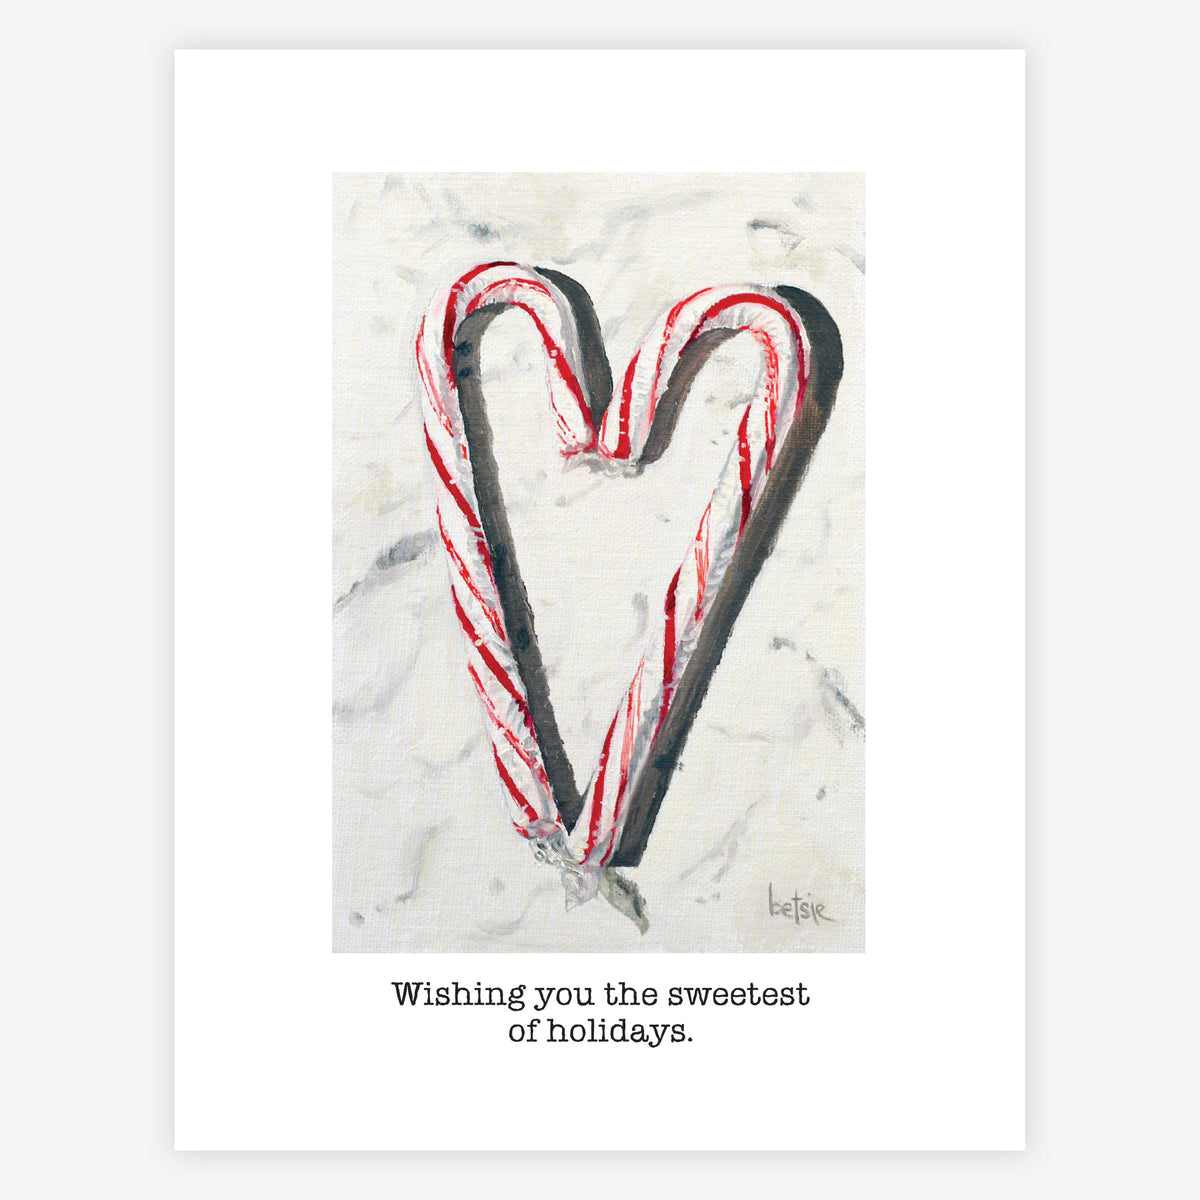 "Wishing you the sweetest of holidays" Greeting Card